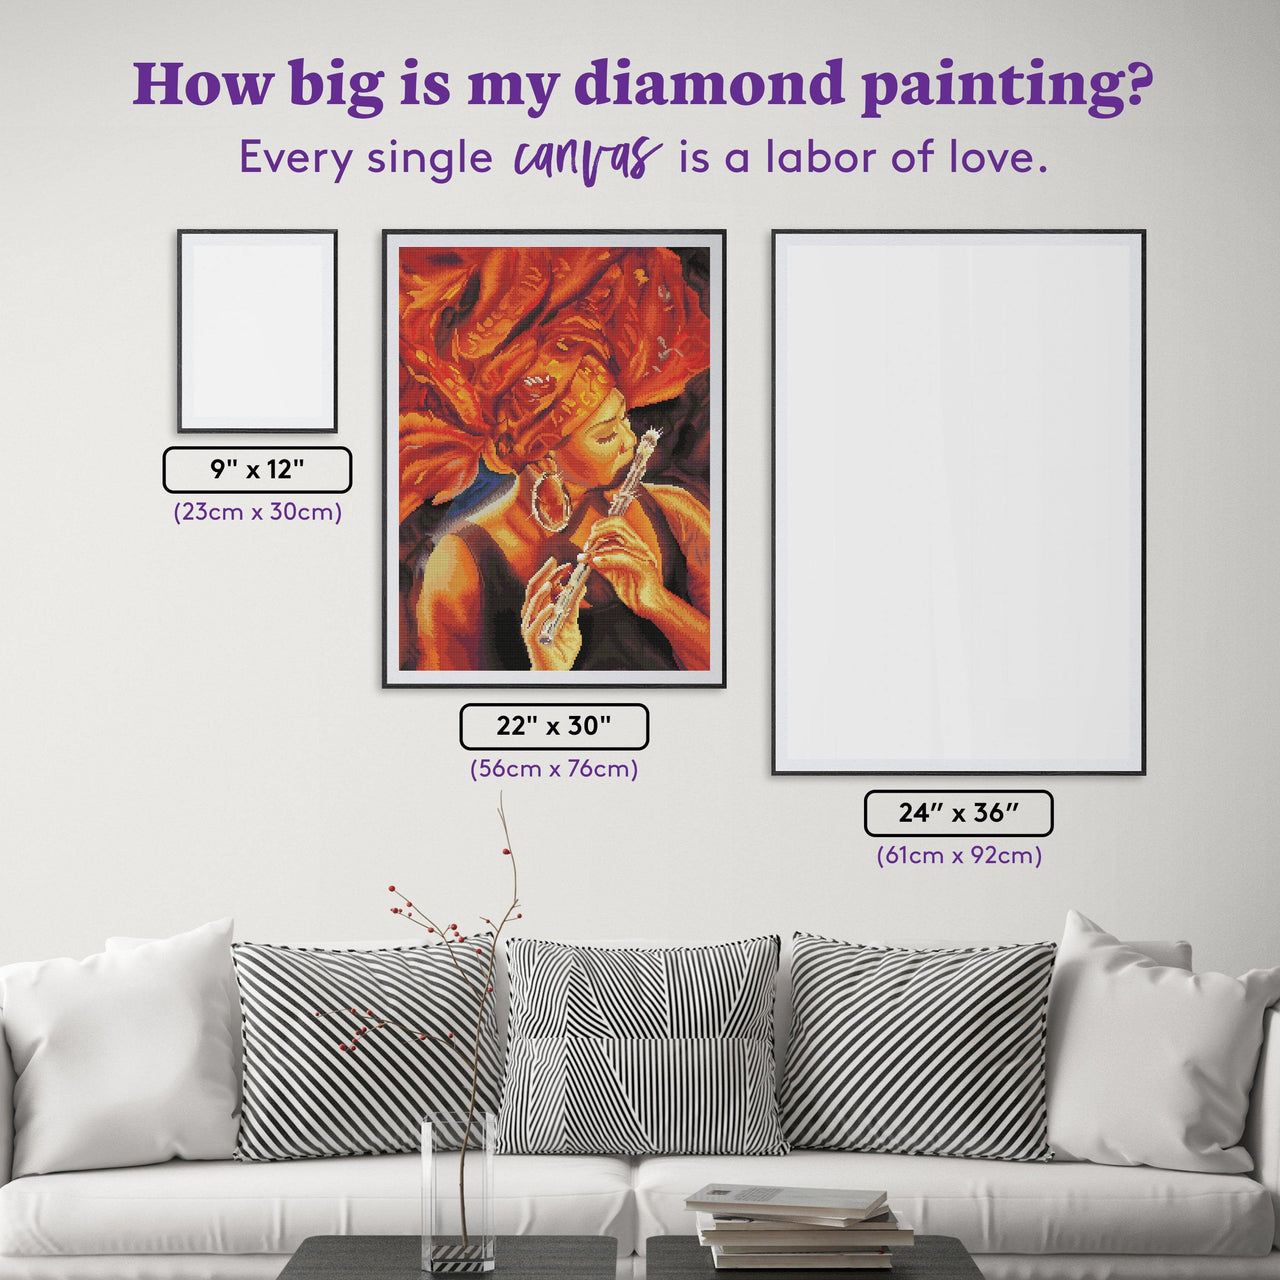 Diamond Painting Rhythm 22" x 30" (56cm x 76cm) / Round With 44 Colors Including 4 ABs / 53,929